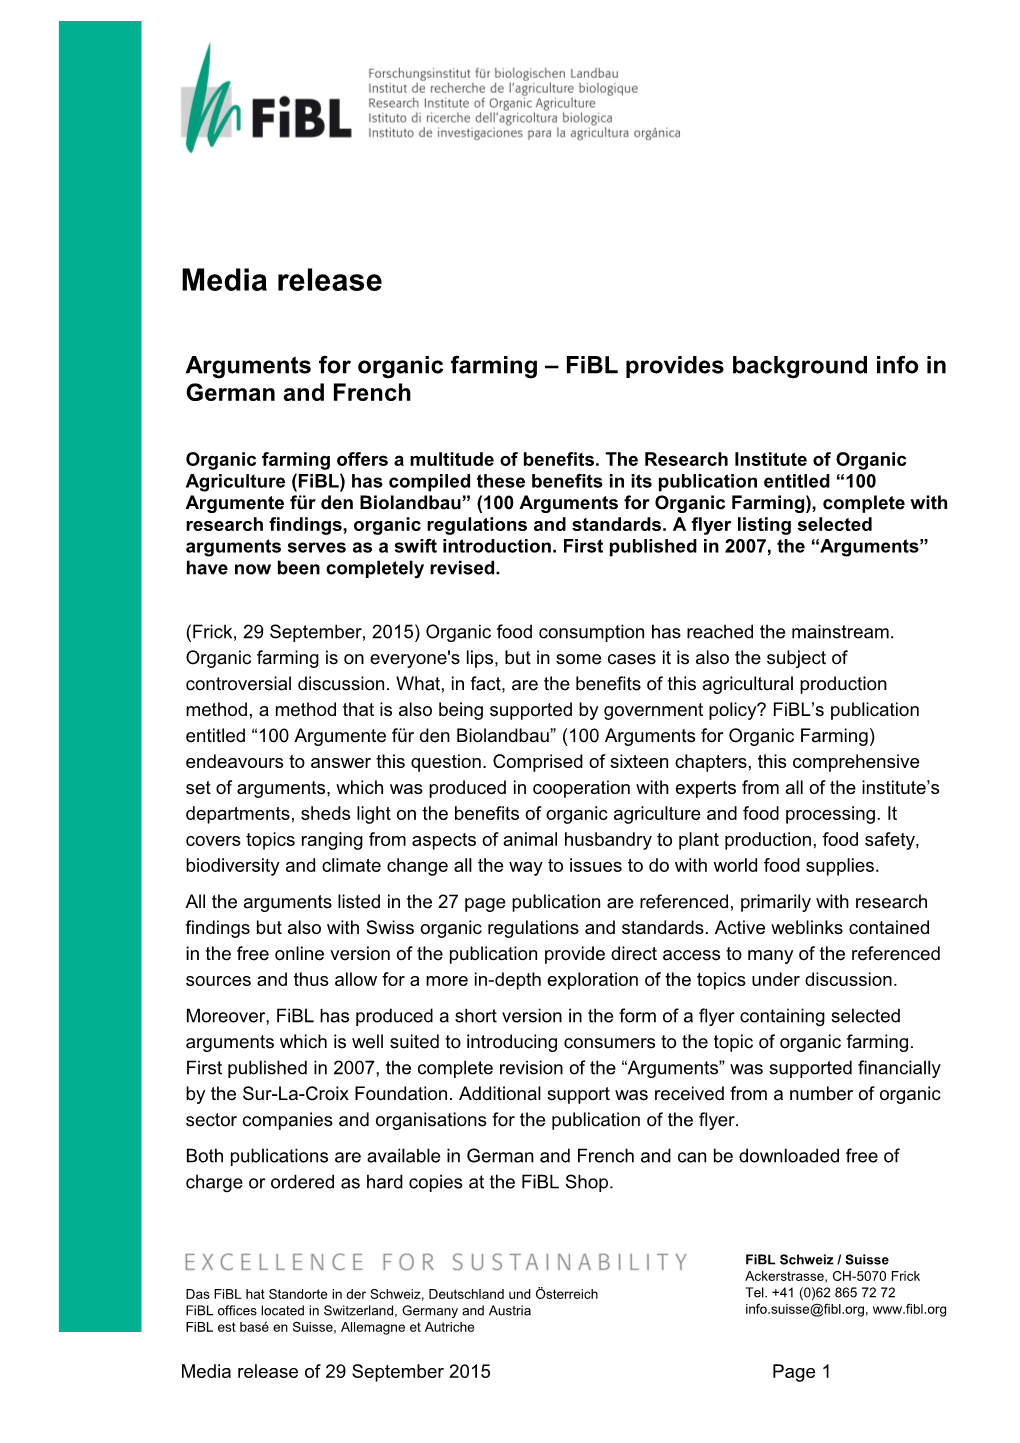 Arguments for Organic Farming Fibl Provides Background Info in German and French - Media Release